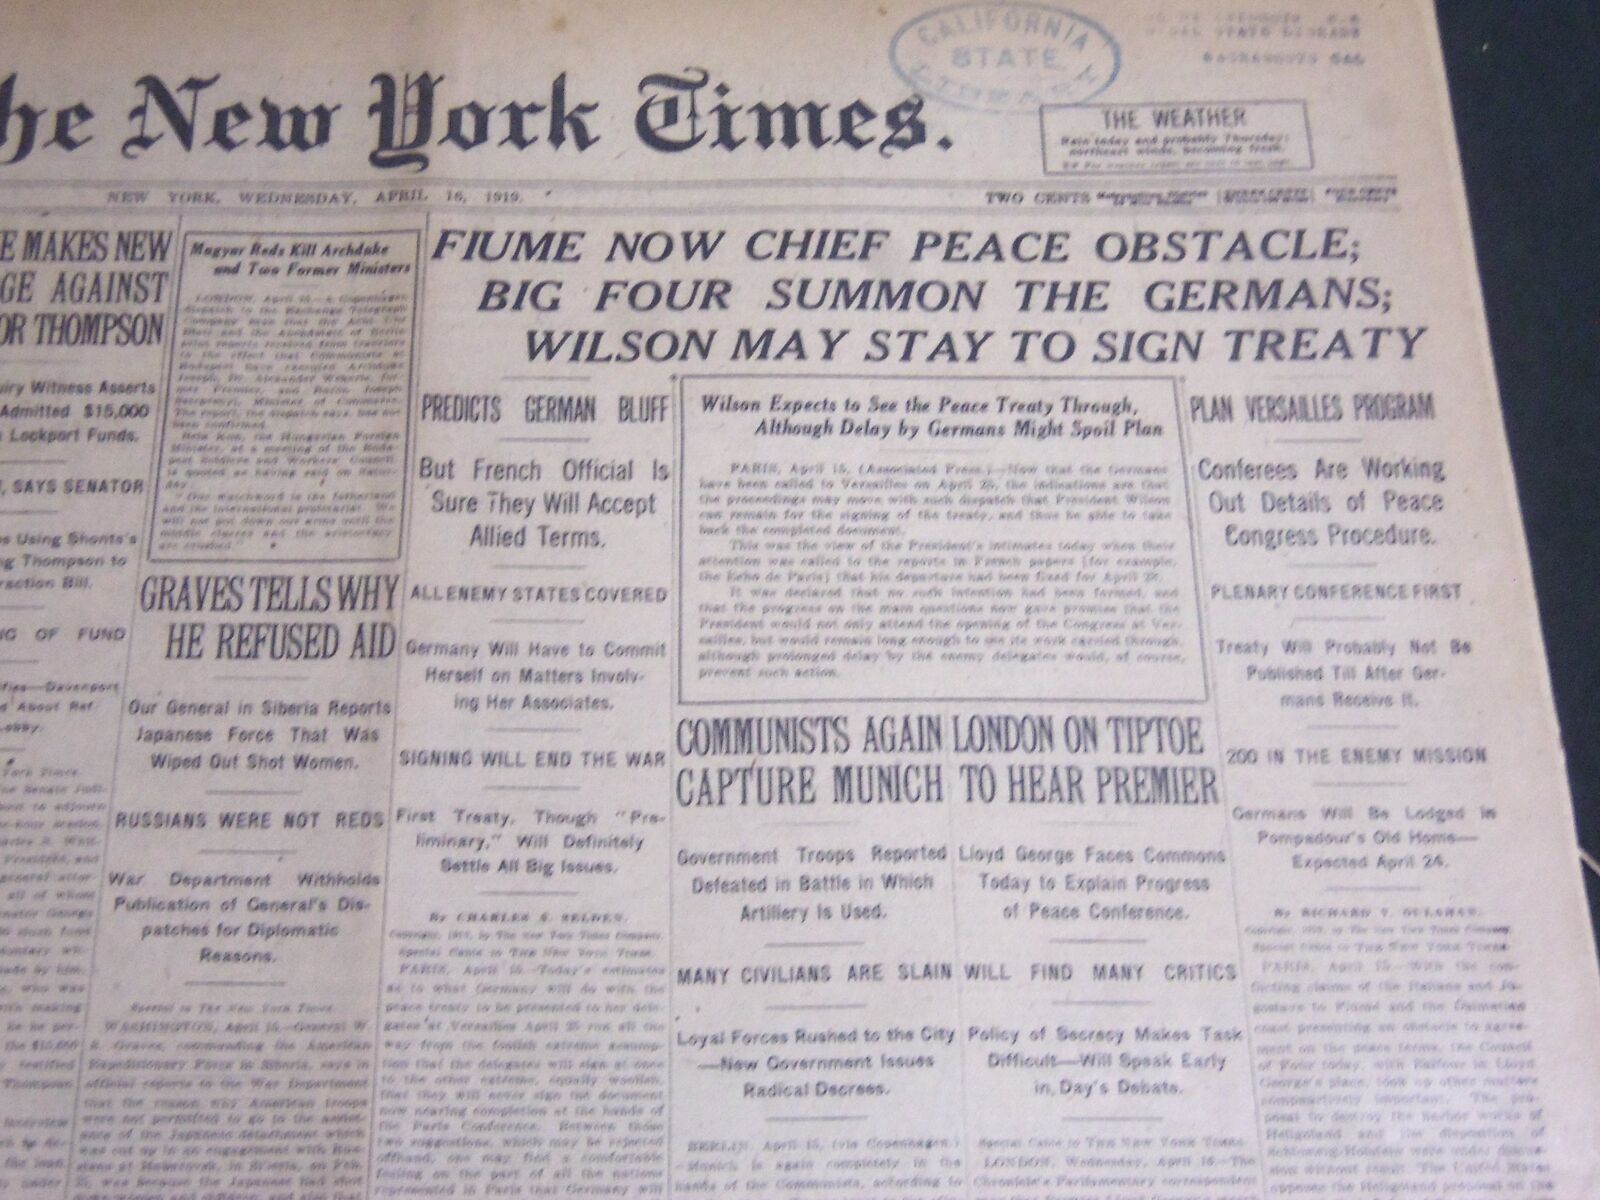 1919 APRIL 16 NEW YORK TIMES - FIUME NOW CHIEF PEACE OBSTACLE - NT 6973